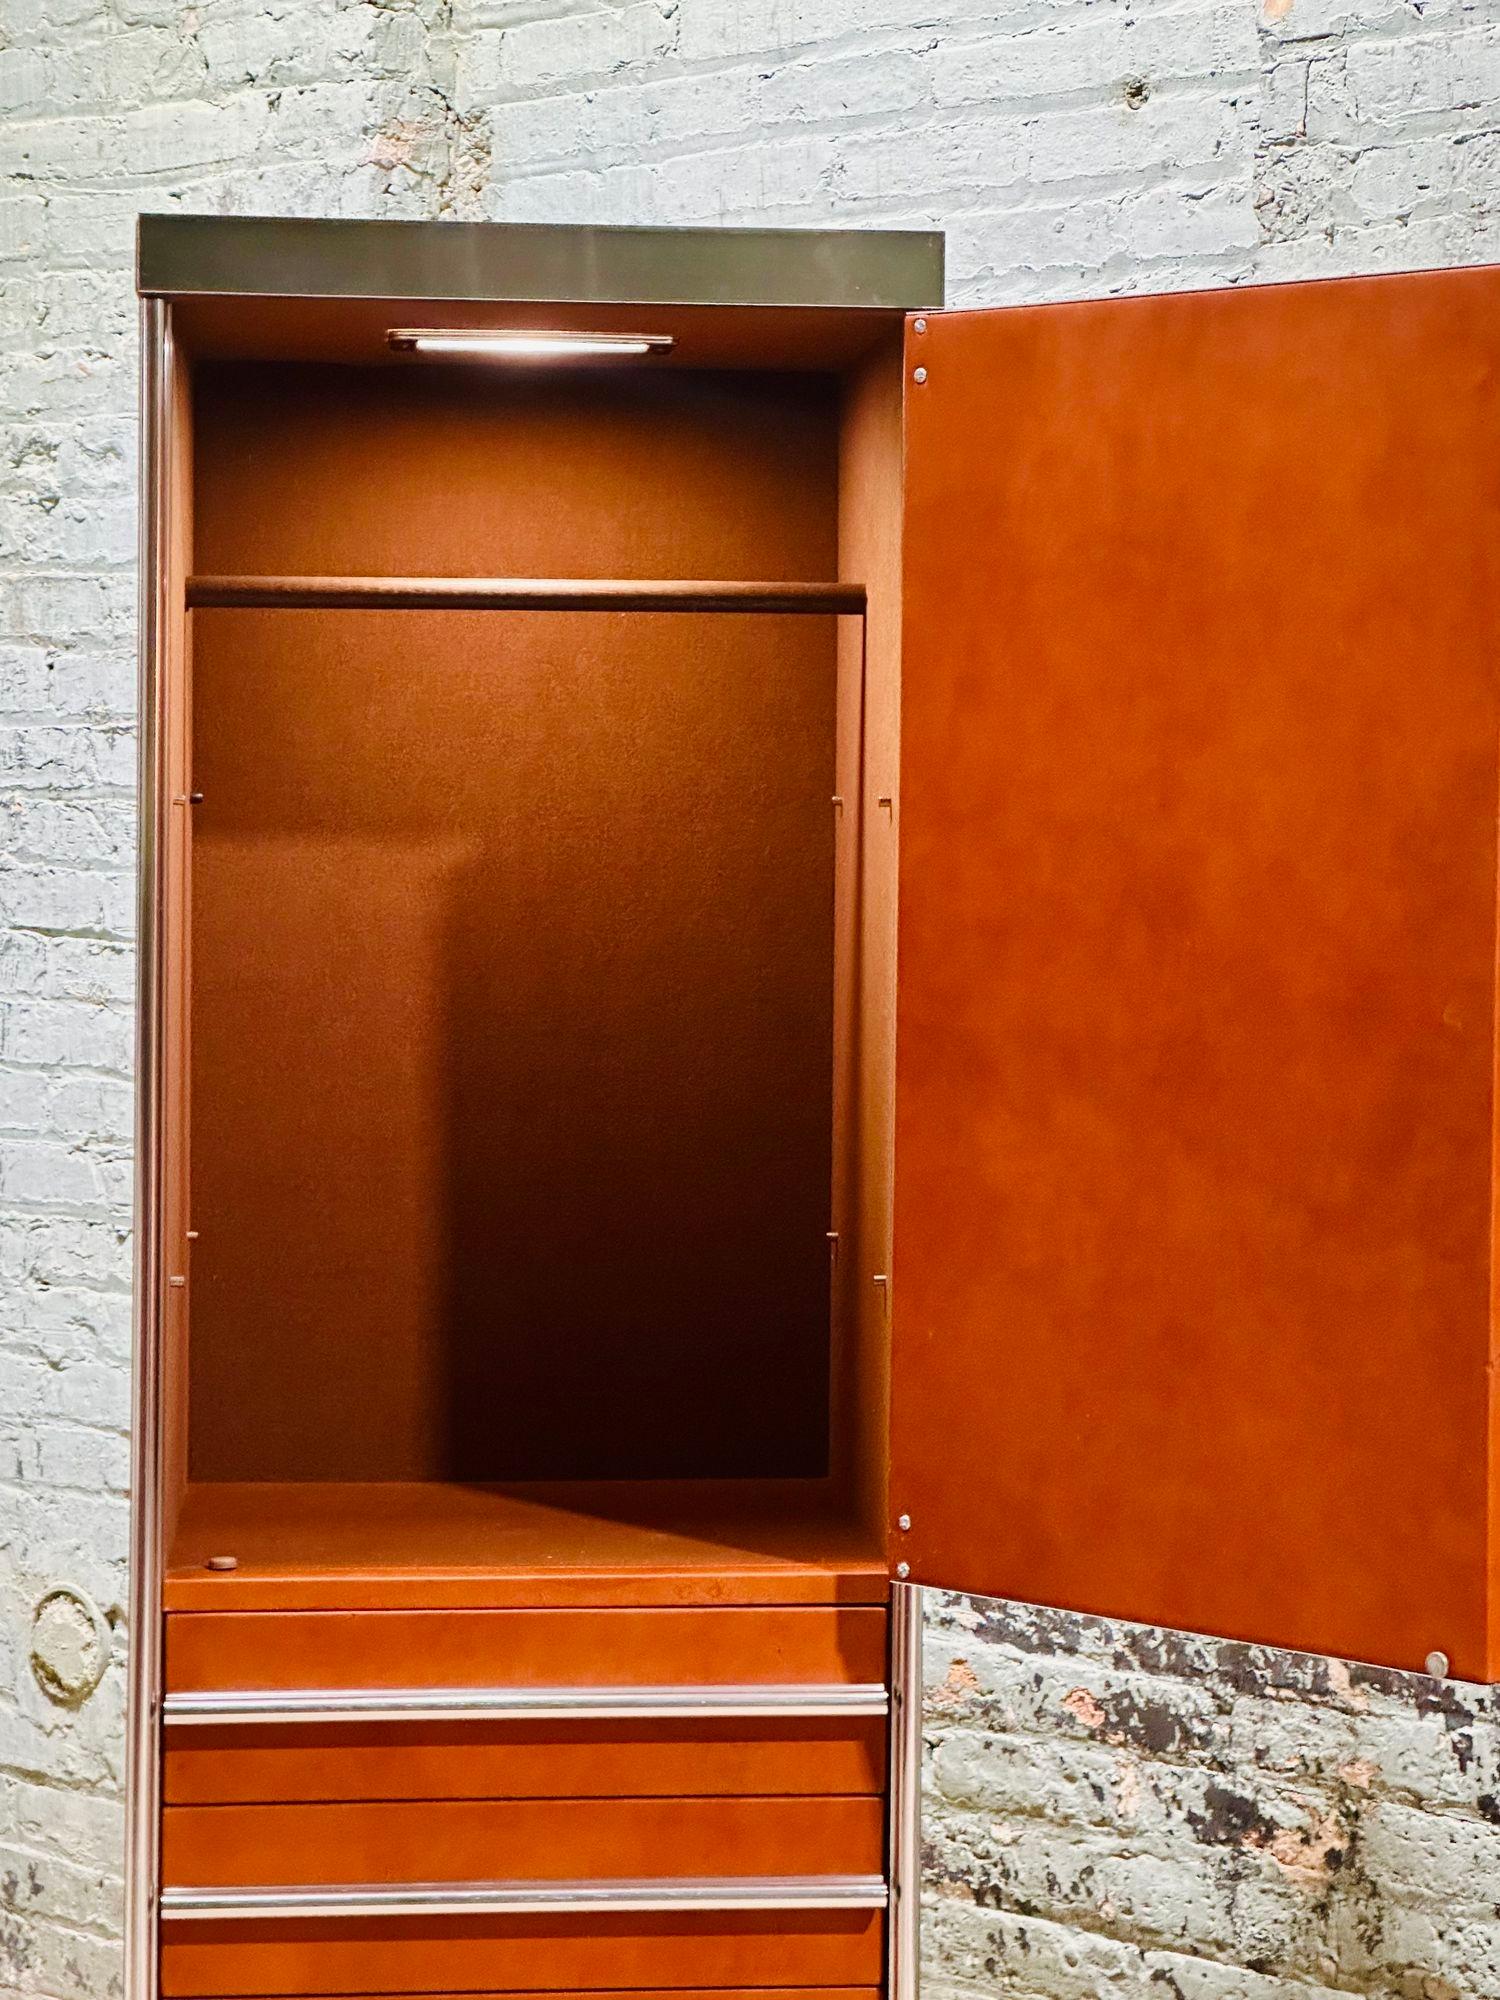 Late 20th Century Wardrobe Cabinet/Bar by Guido Faleschini for Mariani/Pace, Italy 1970 For Sale